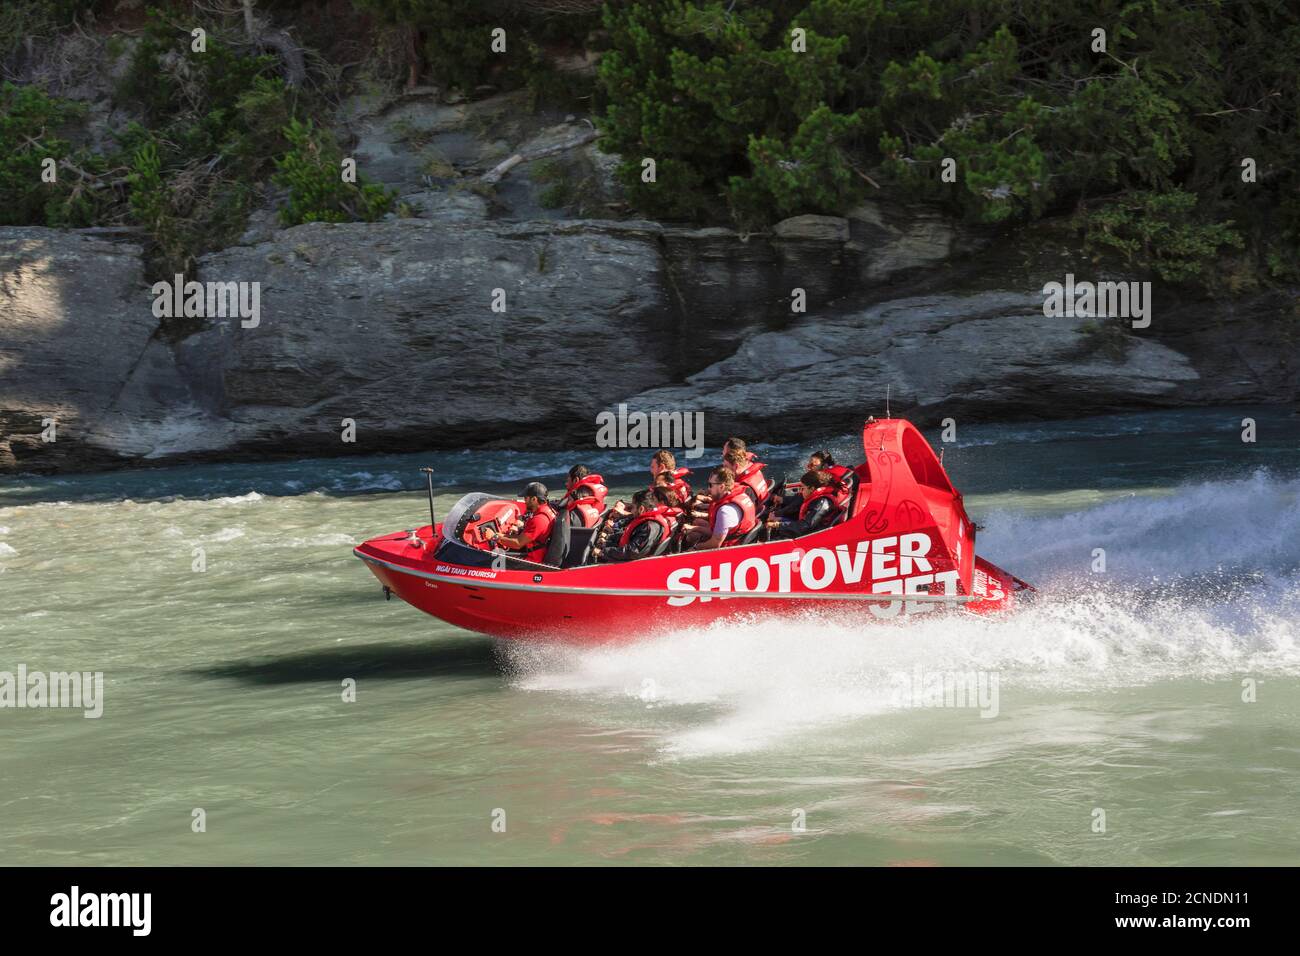 Shotover Jetboat, Shotover River, Queenstown, Otago, South Island, New Zealand, Pacific Stock Photo